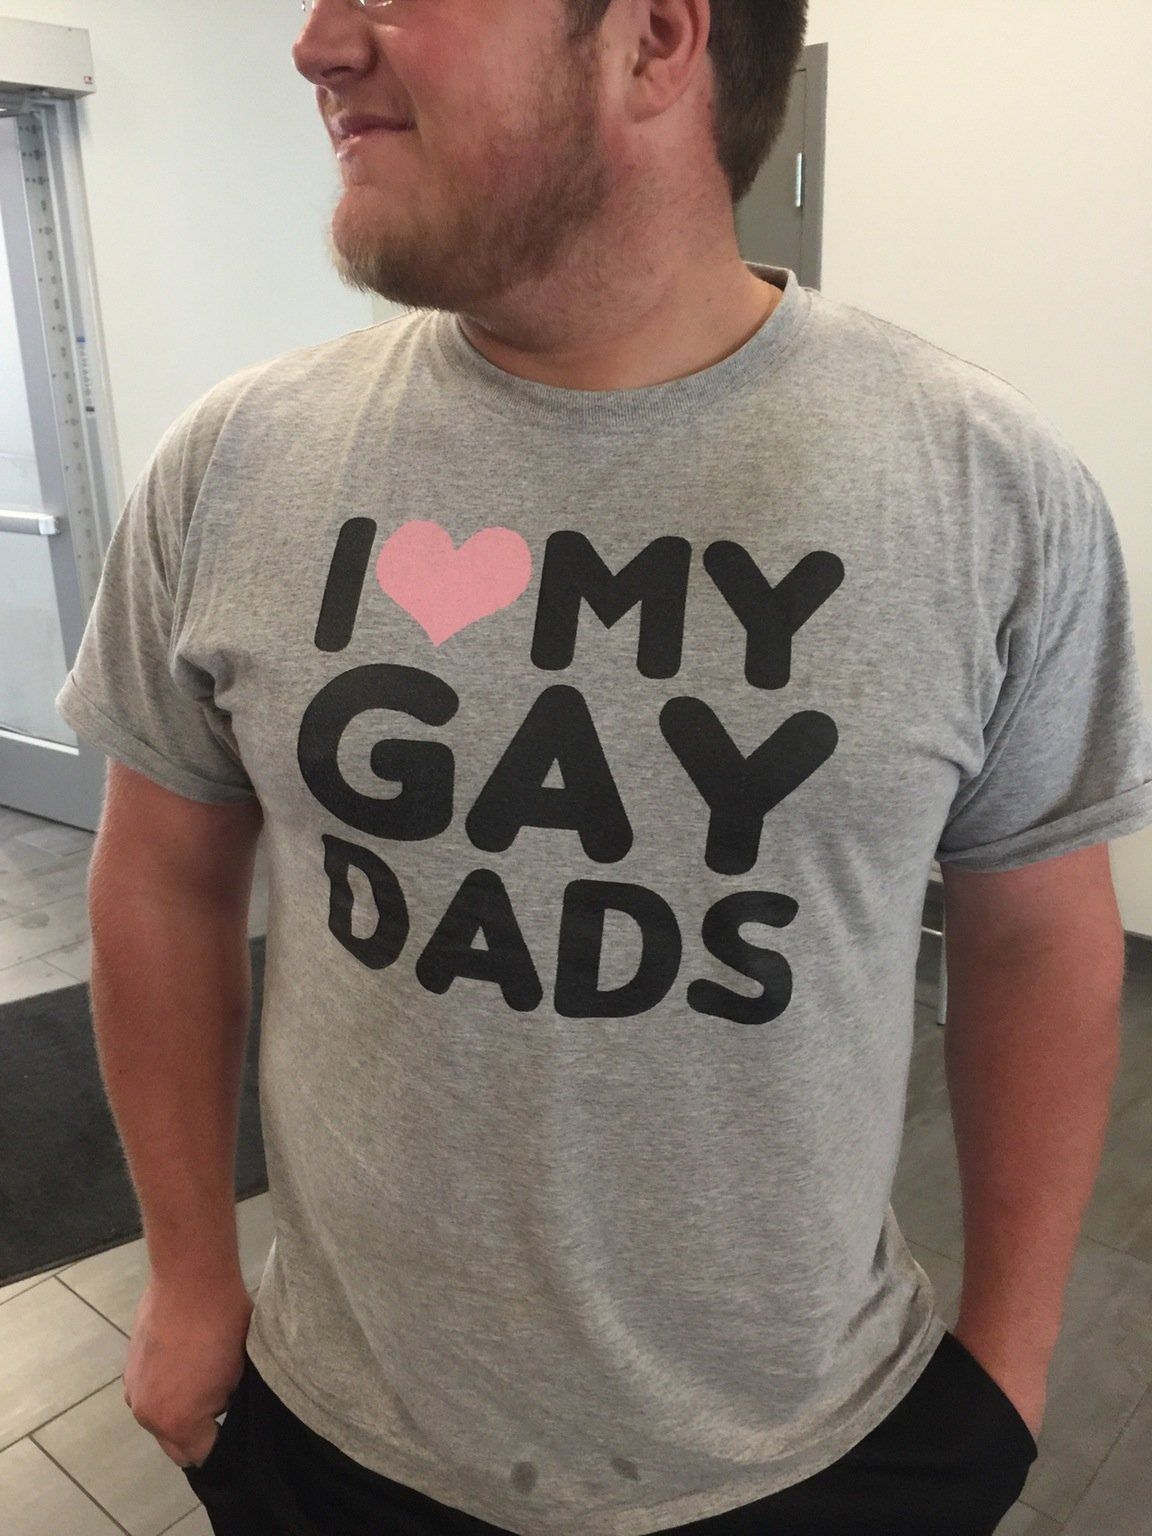 I complimented this guy for his shirt. He thanked me and told me he got it because it makes his dad mad.